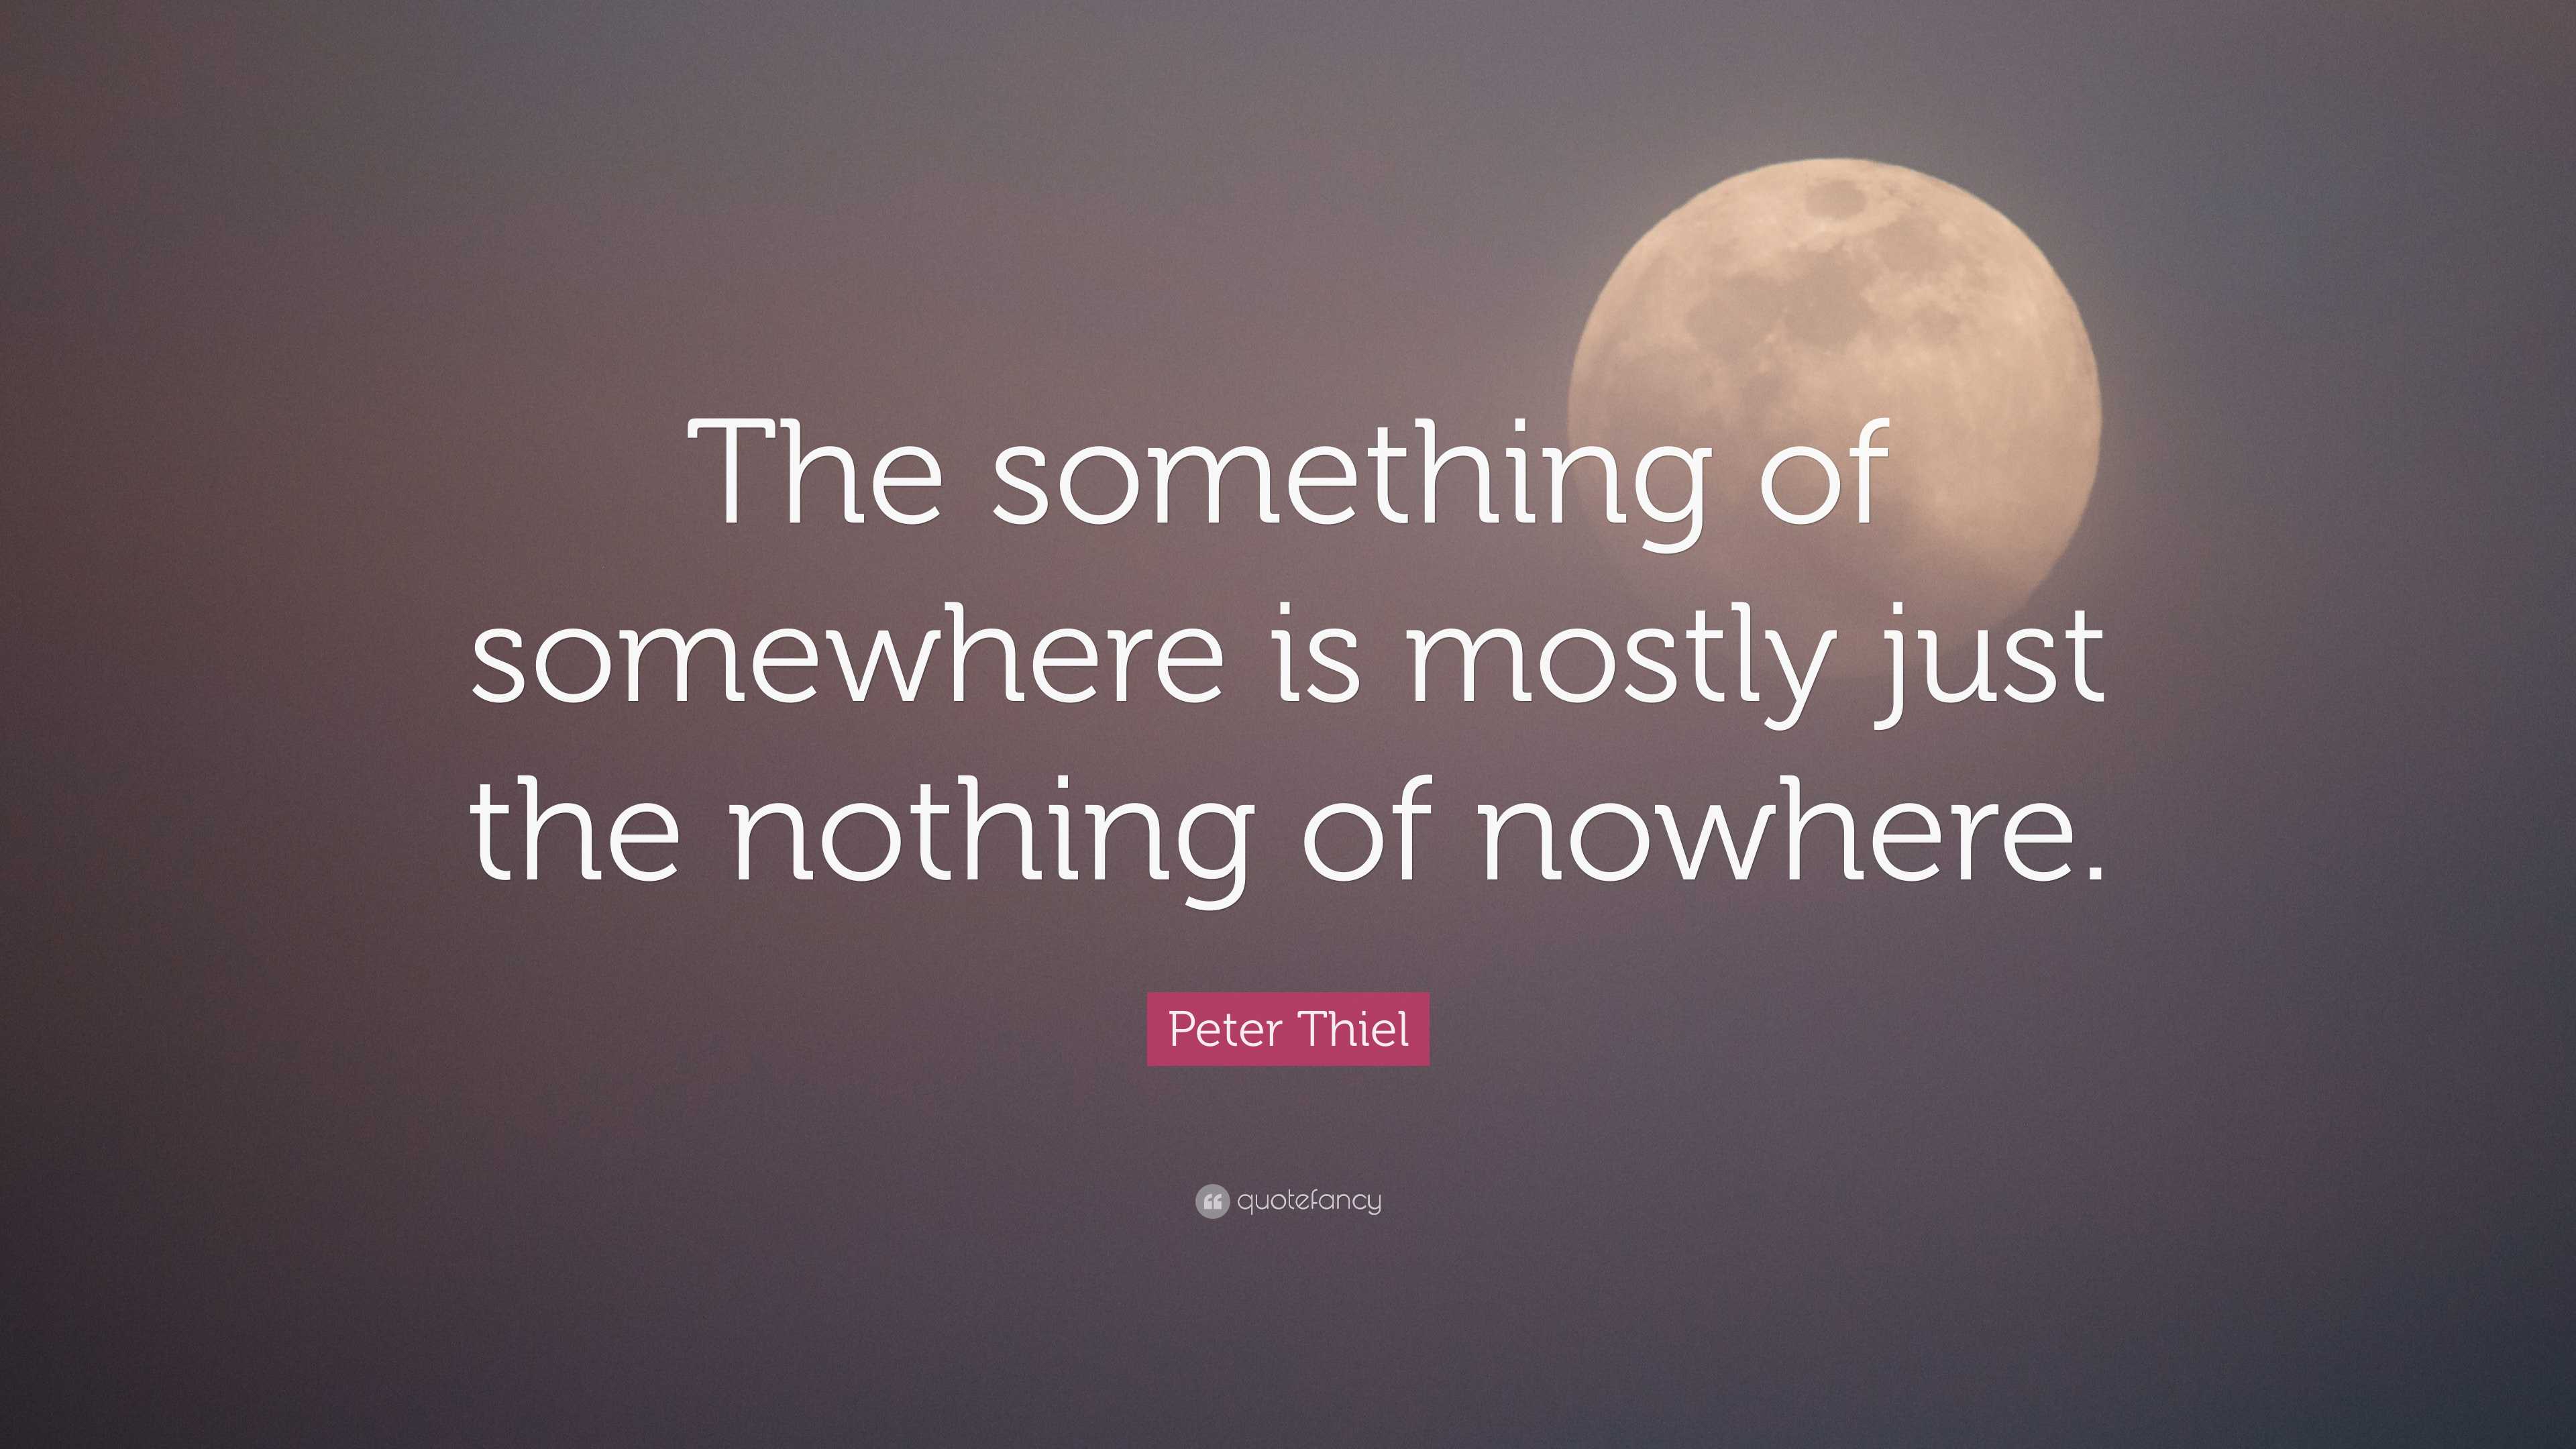 7912860-Peter-Thiel-Quote-The-something-of-somewhere-is-mostly-just-the.jpg